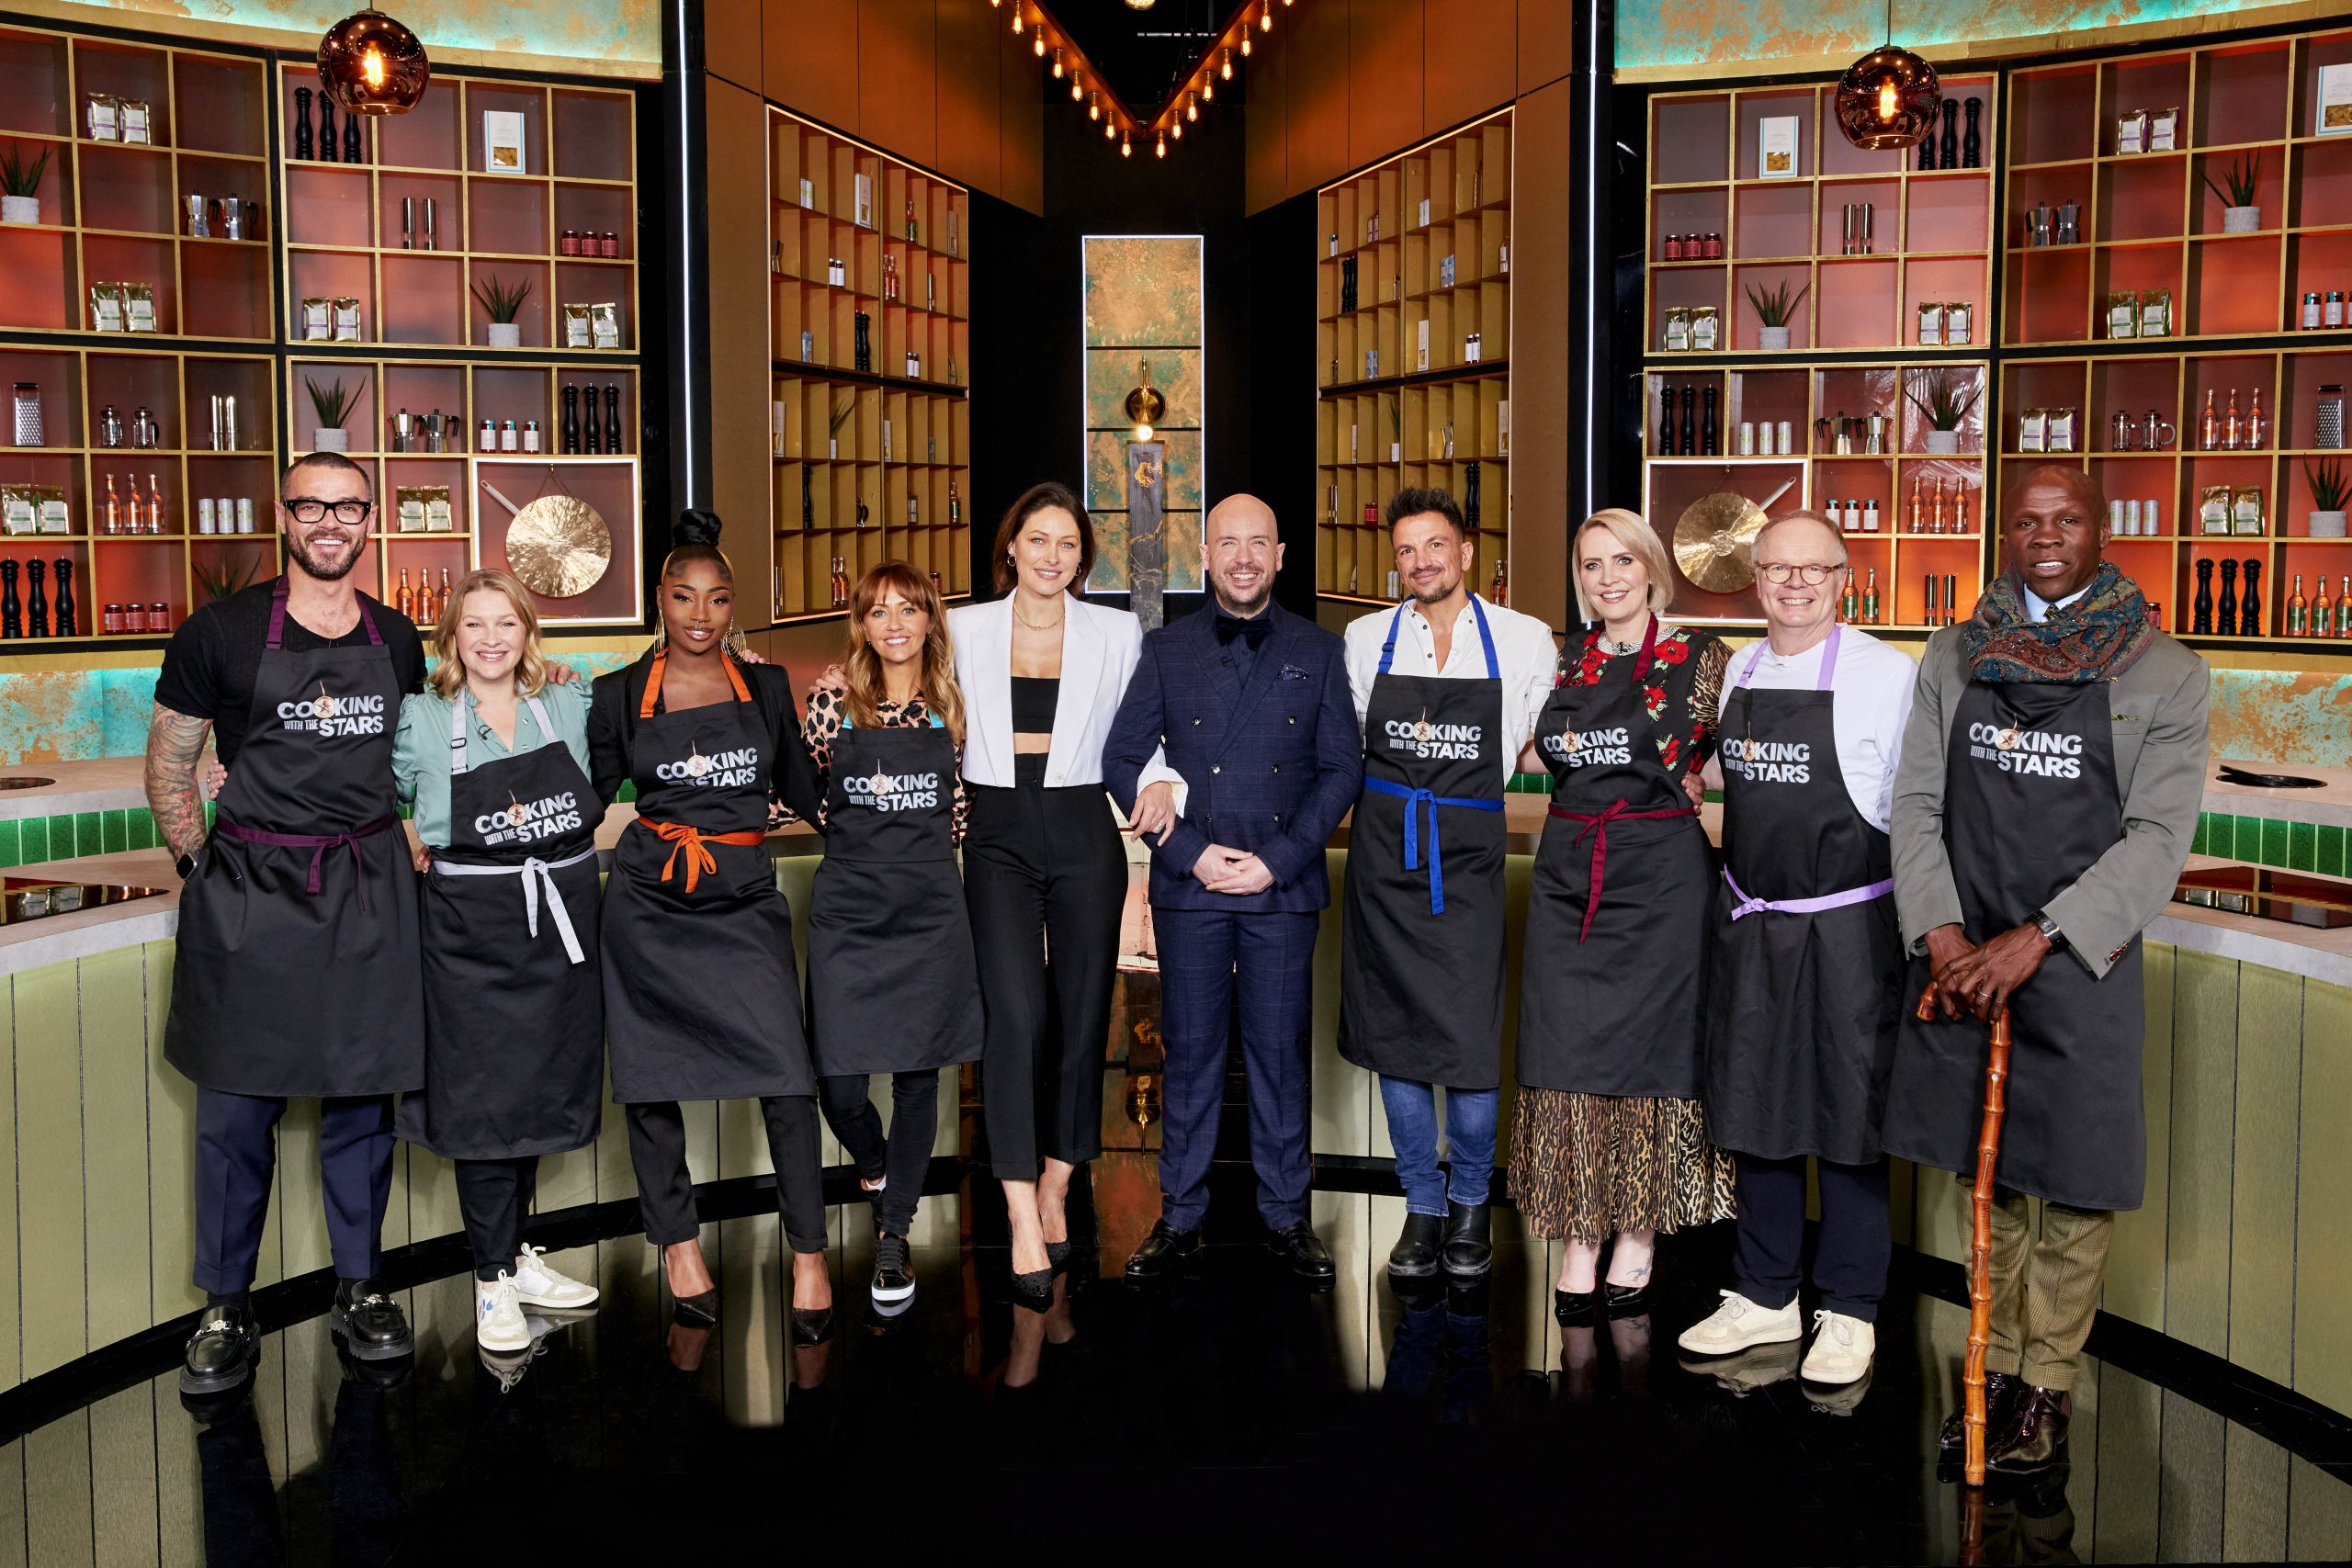 ITV confirms huge cooking show is returning to screens next year with all-star cast